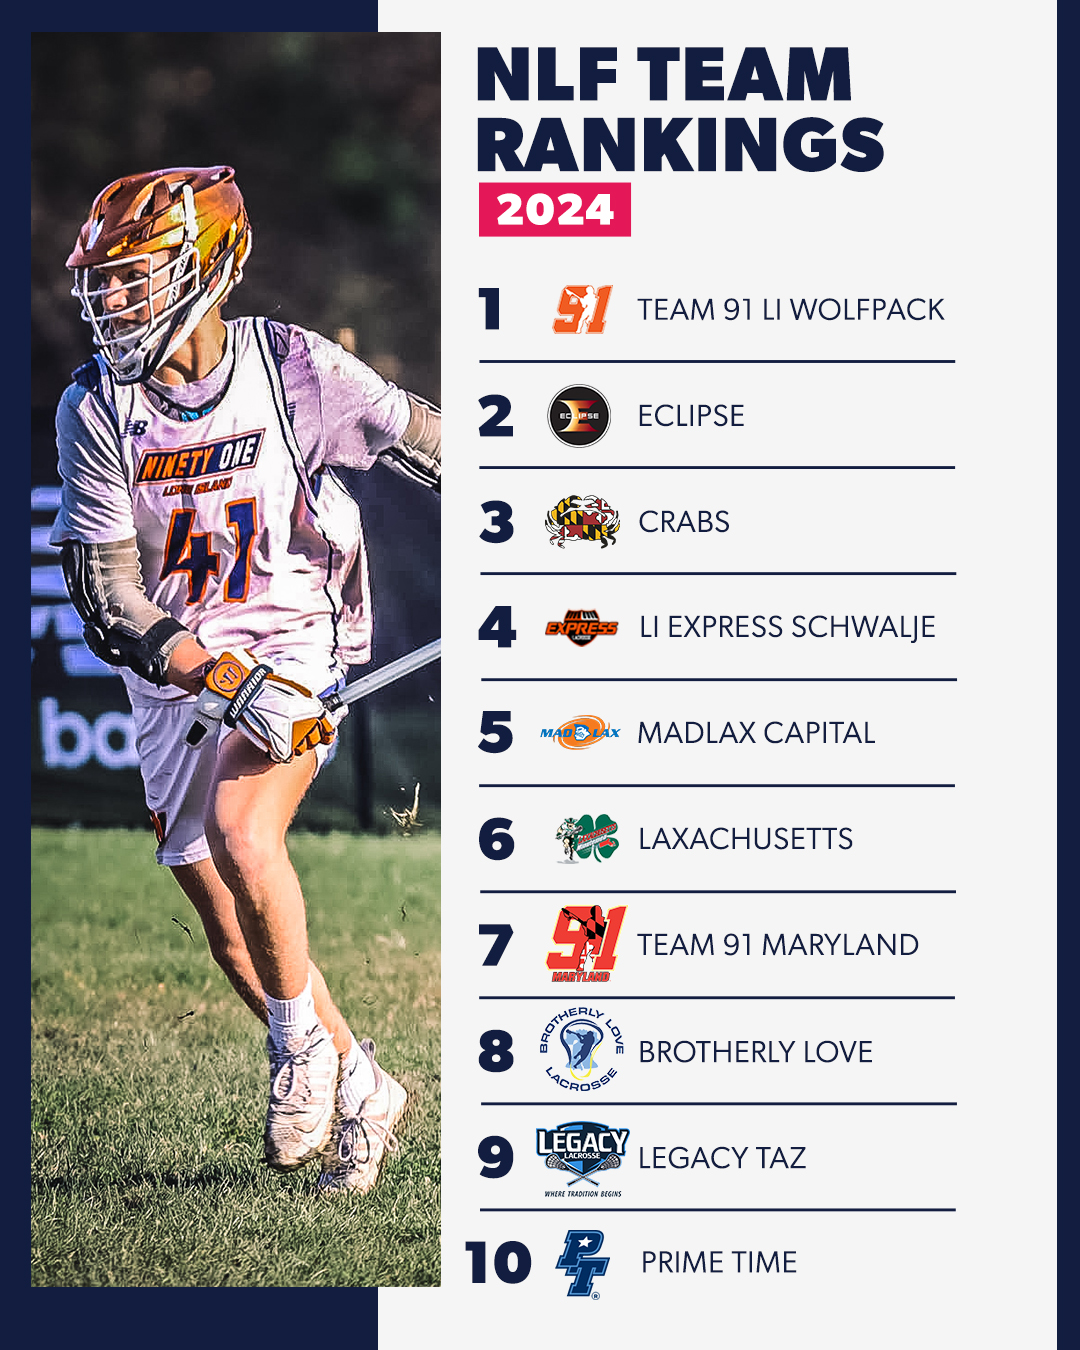 NLF Team Rankings Team 91 Long Island Leads the Pack in 2024 Class